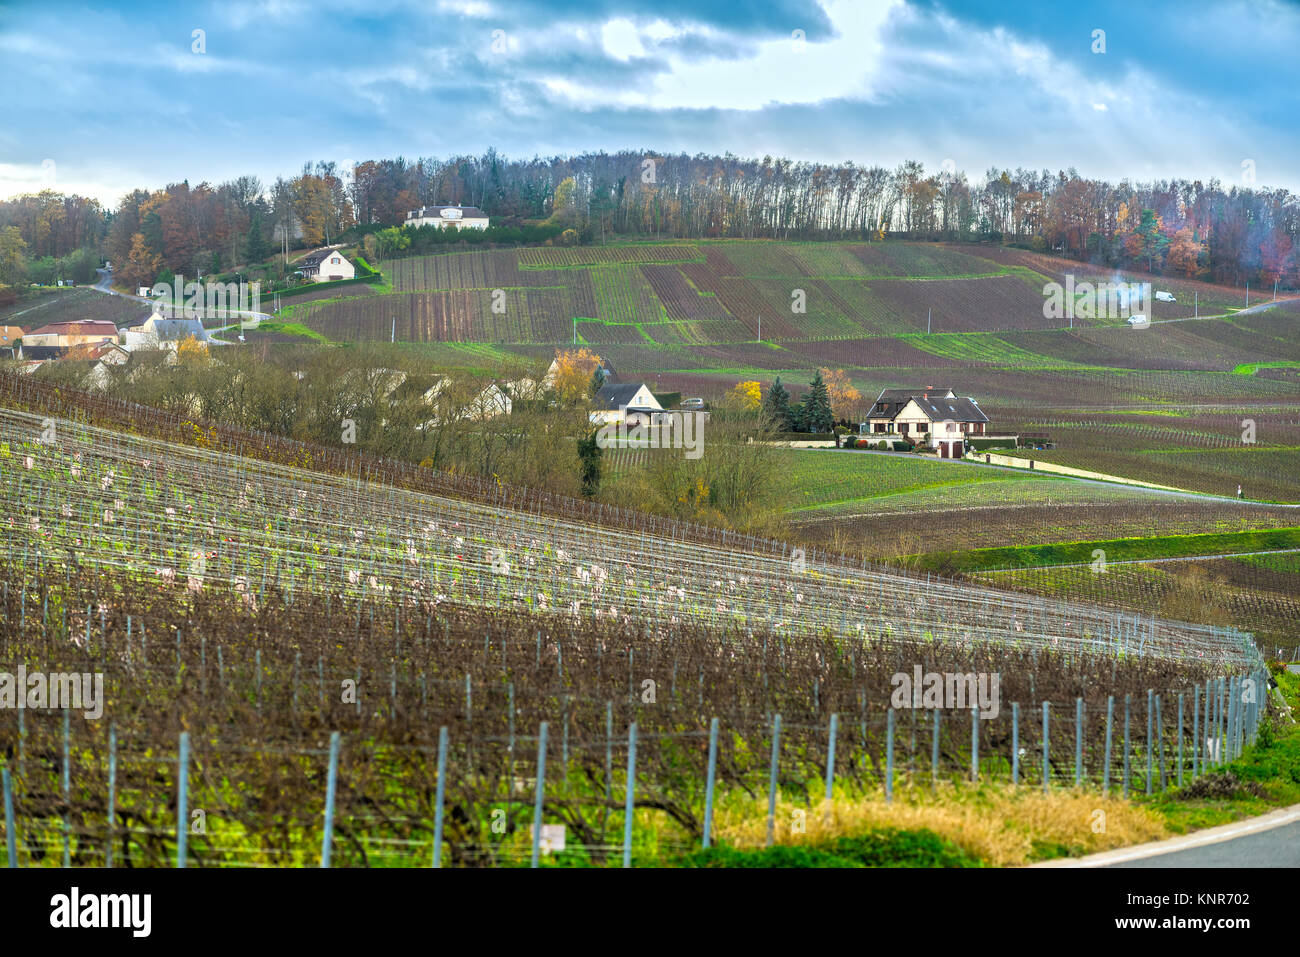 Champagne vineyards in the village of Moussy, Epernay, Marne, Champagne region, France Stock Photo